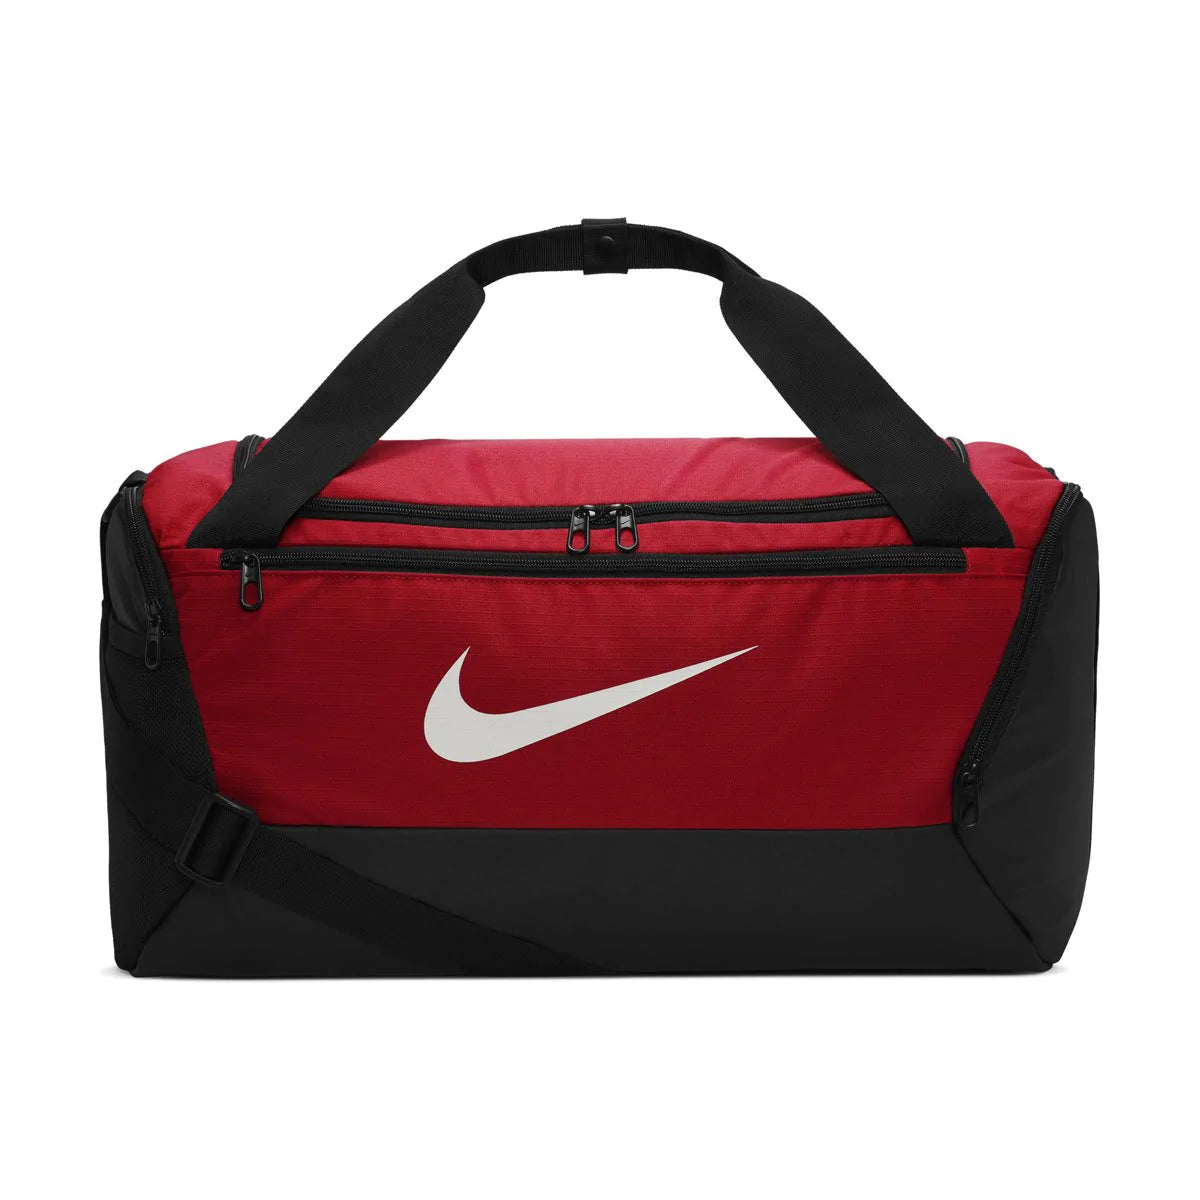 Are You Looking for Nike Duffel Bags?